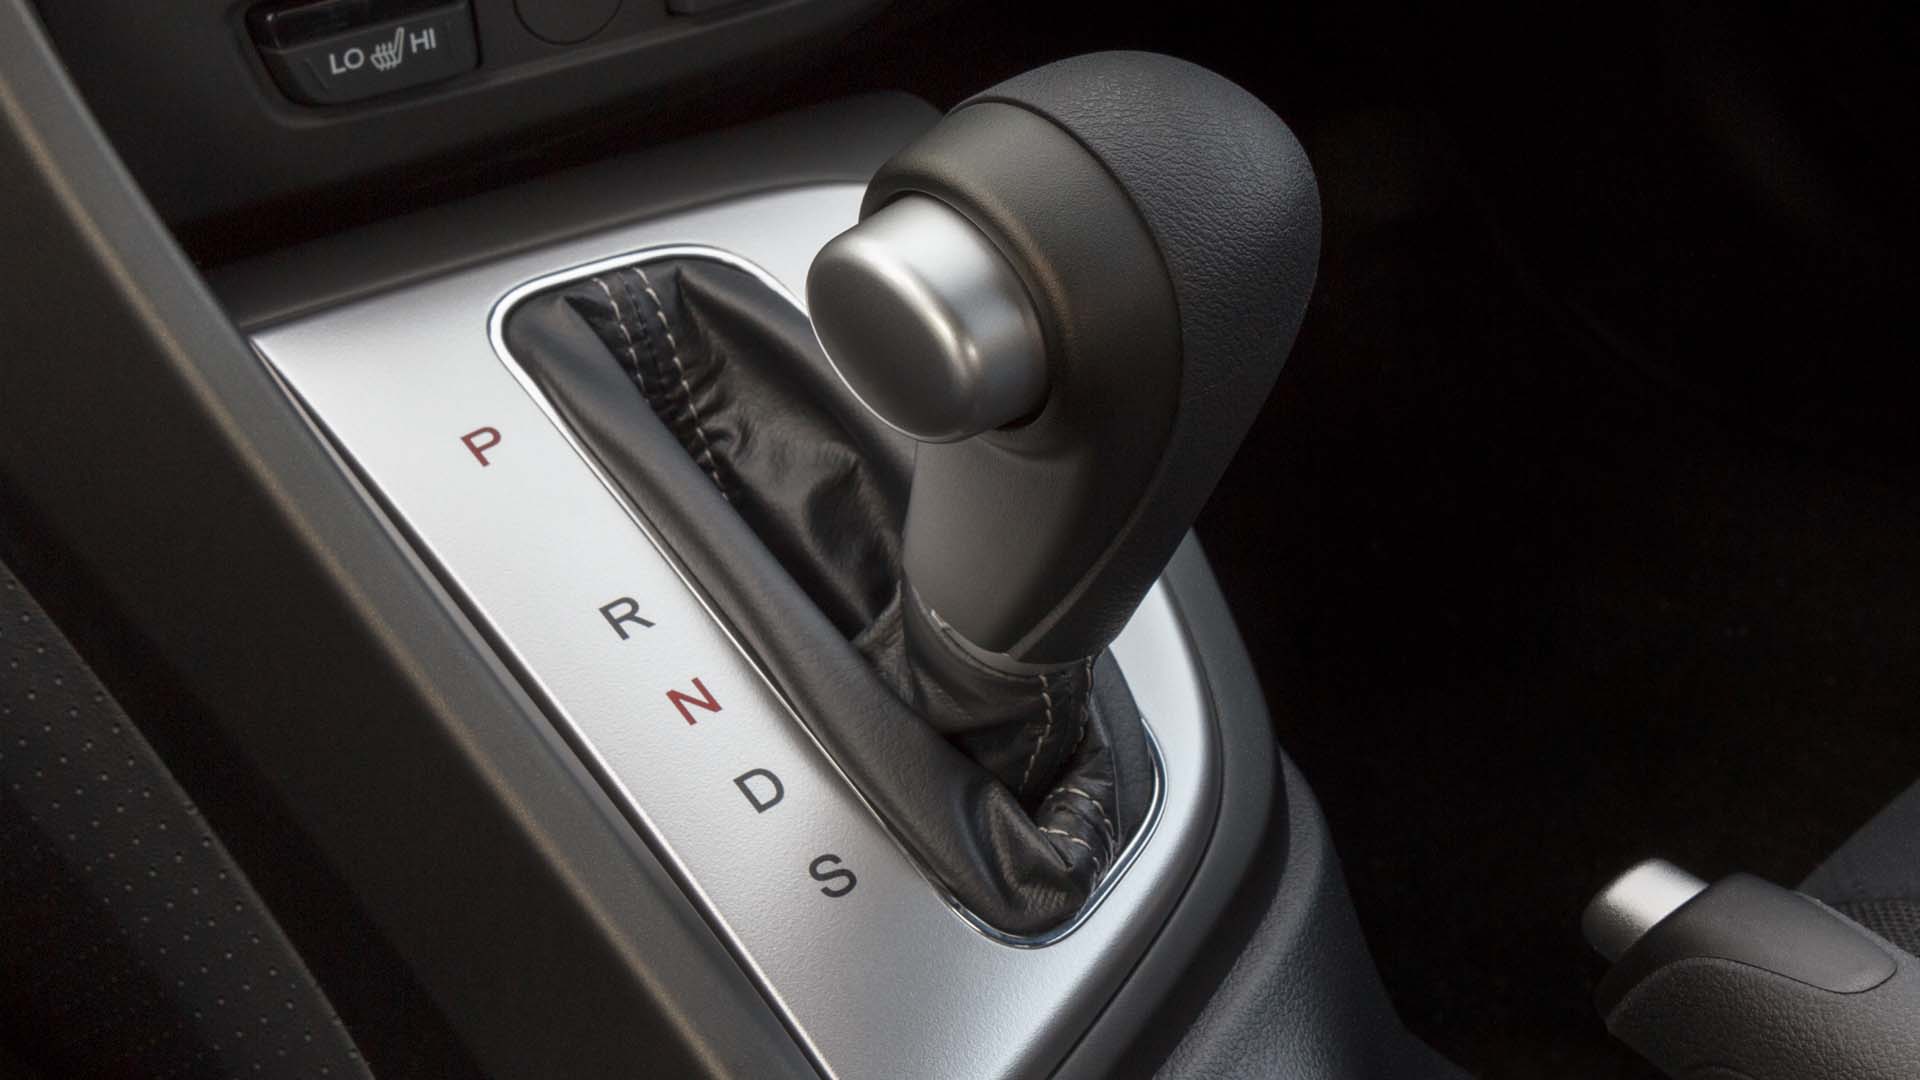 An automatic shifter